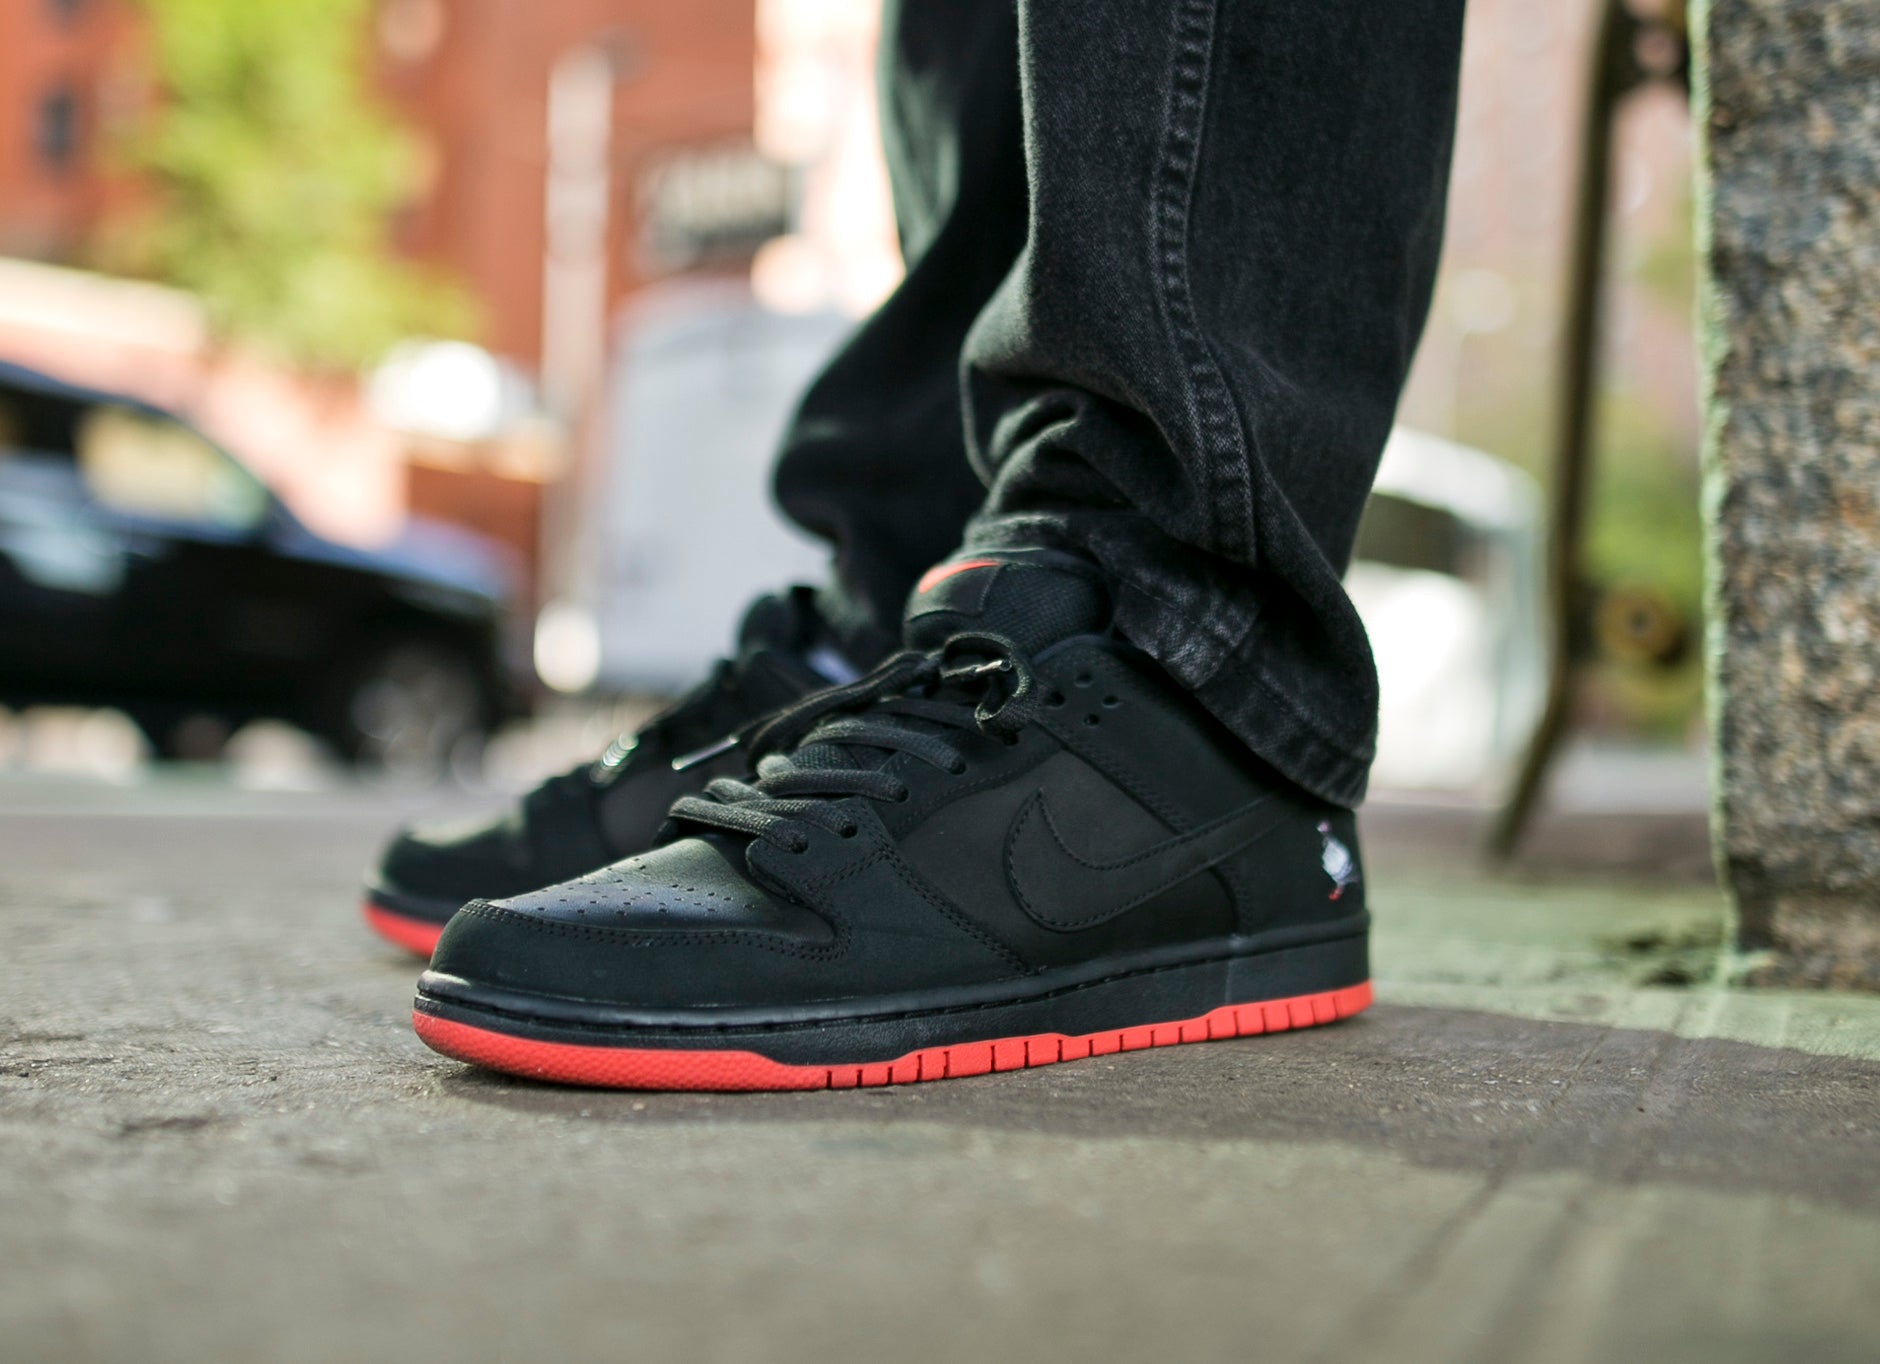 The “BLACK PIGEON” by Nike SB & Staple Pigeon | Extra Butter